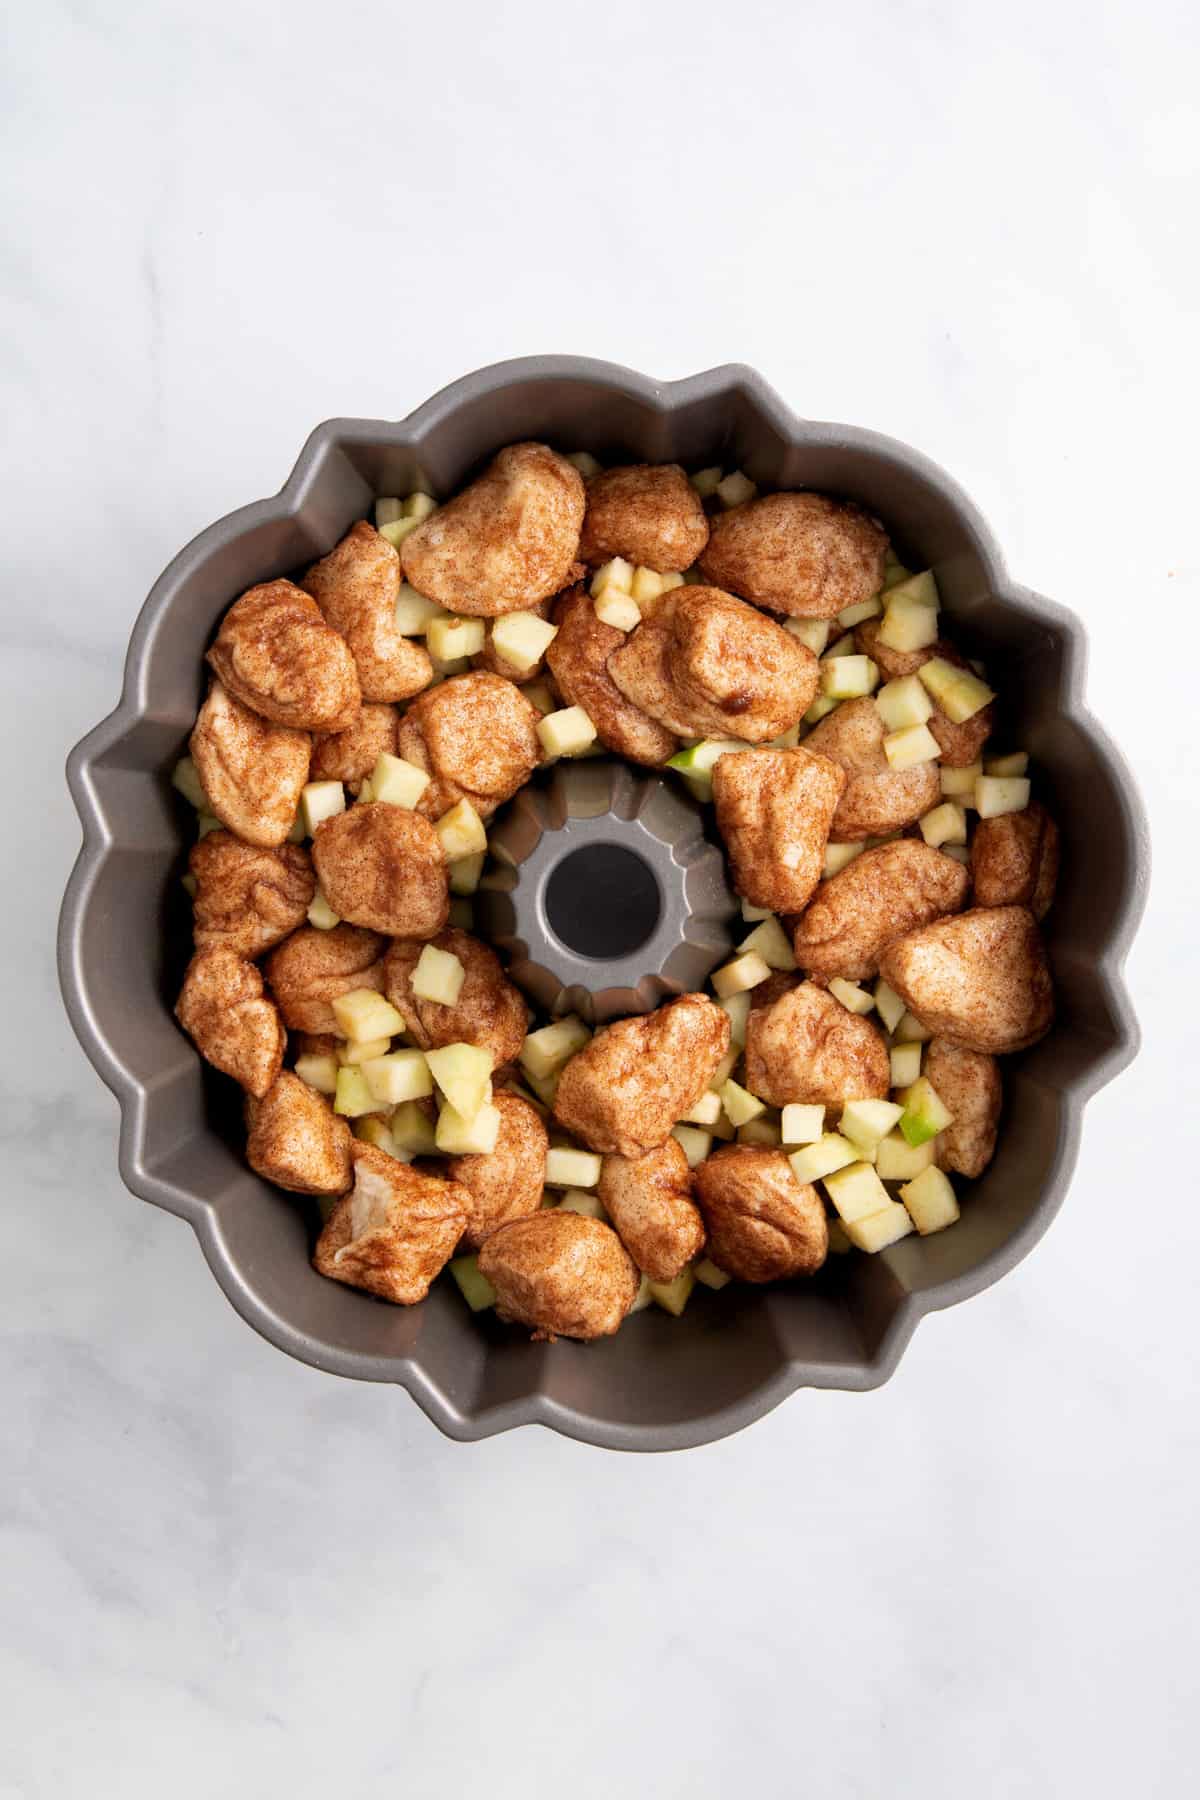 cinnamon dough pieces and chopped granny smith apples topped with more cinnamon dough sitting in a bundt cake tin